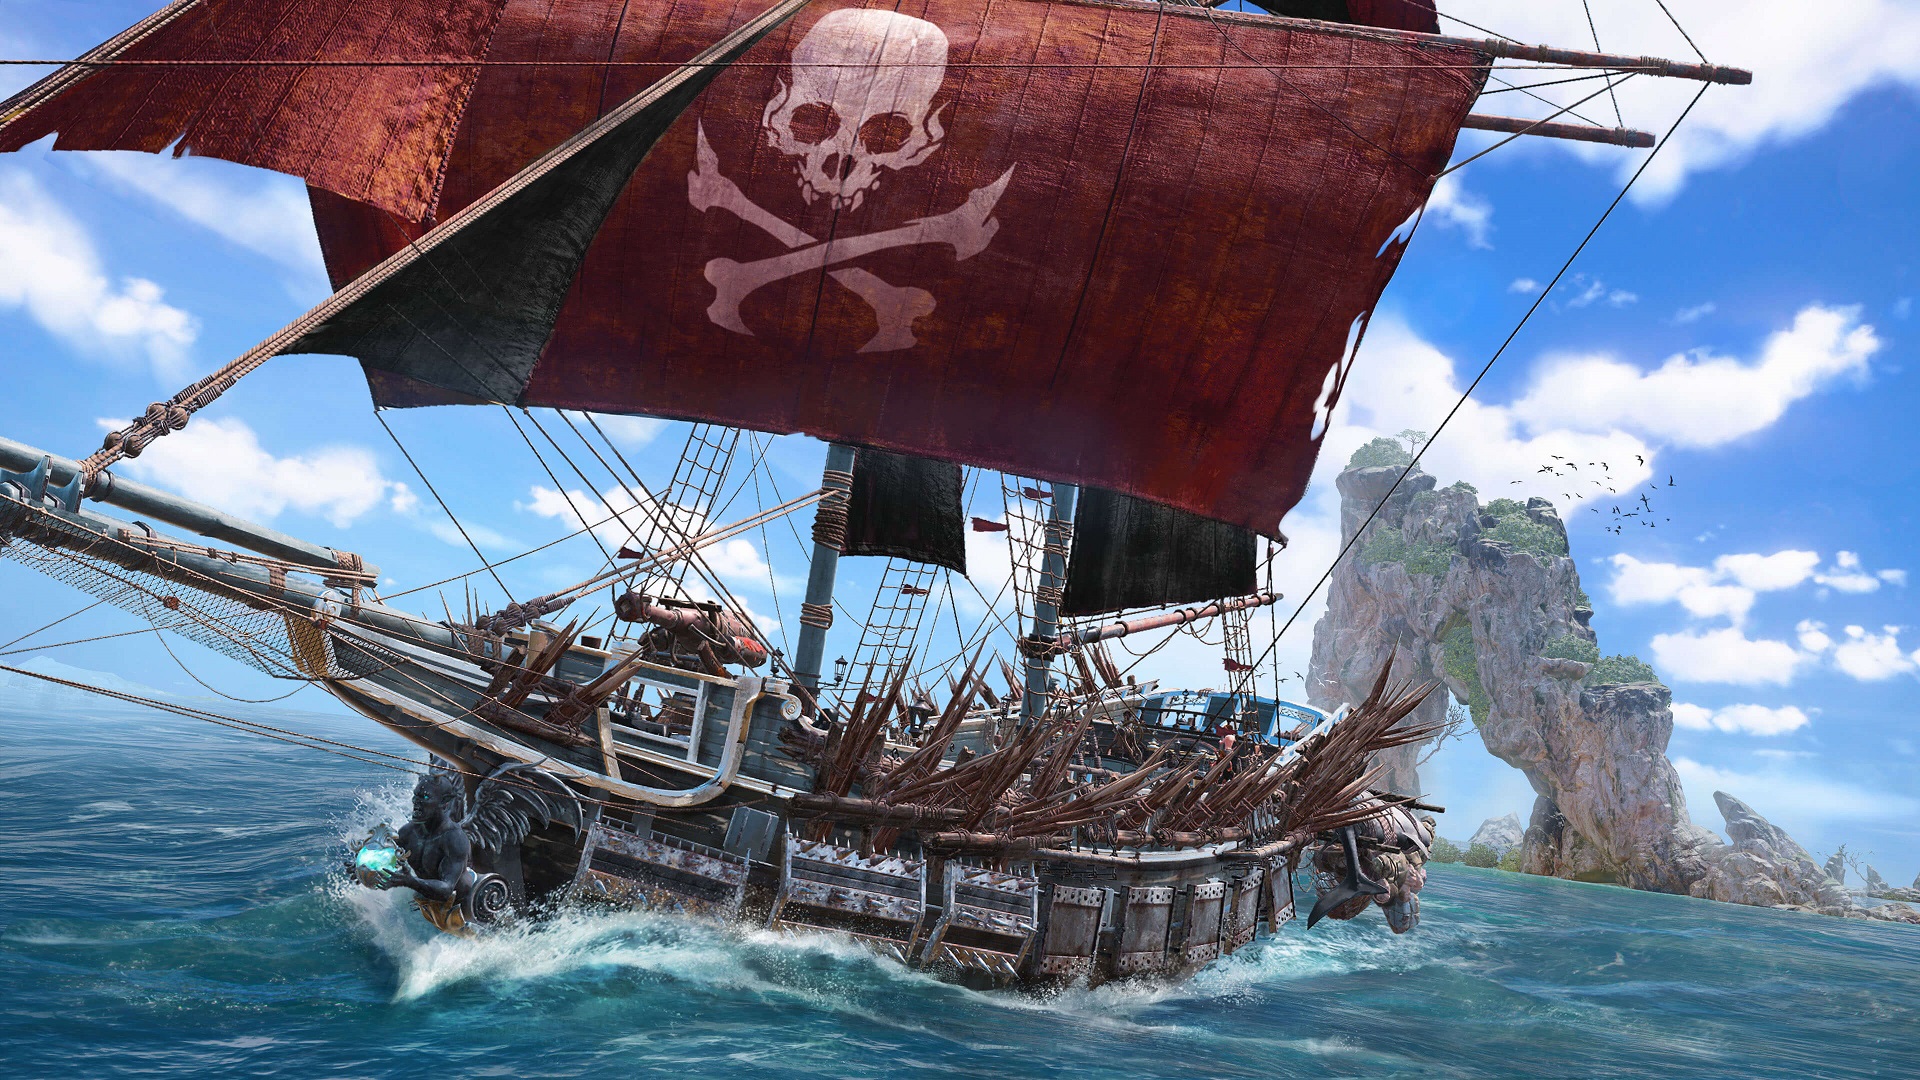 Skull and Bones gets new gameplay and world overview trailers plus dev commentary